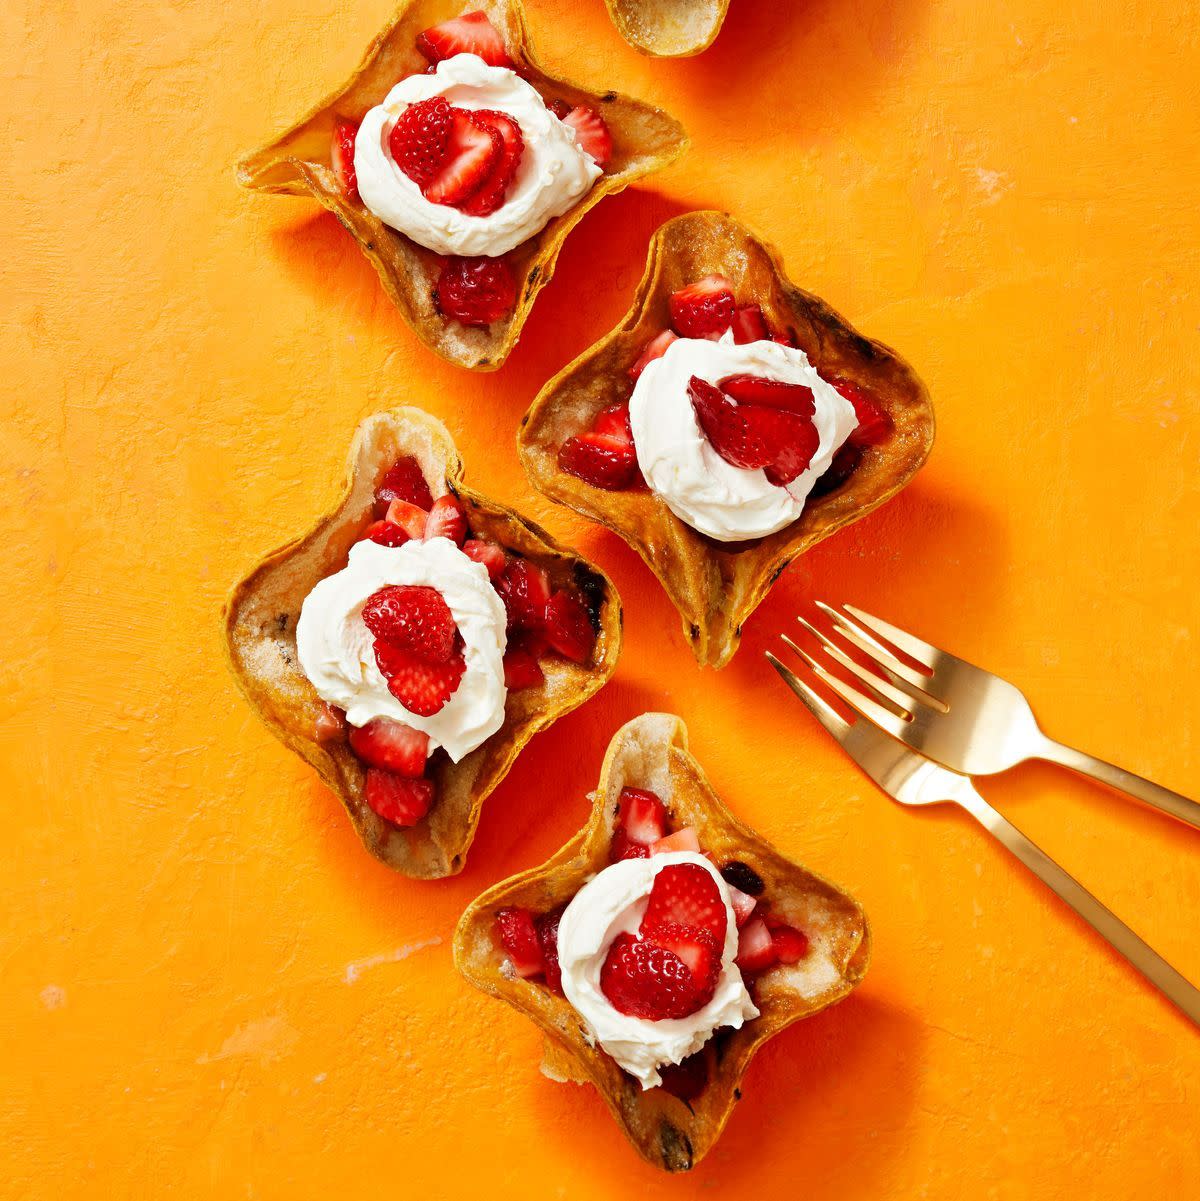 crispy tortilla bowls with strawberries and cream on an orange background